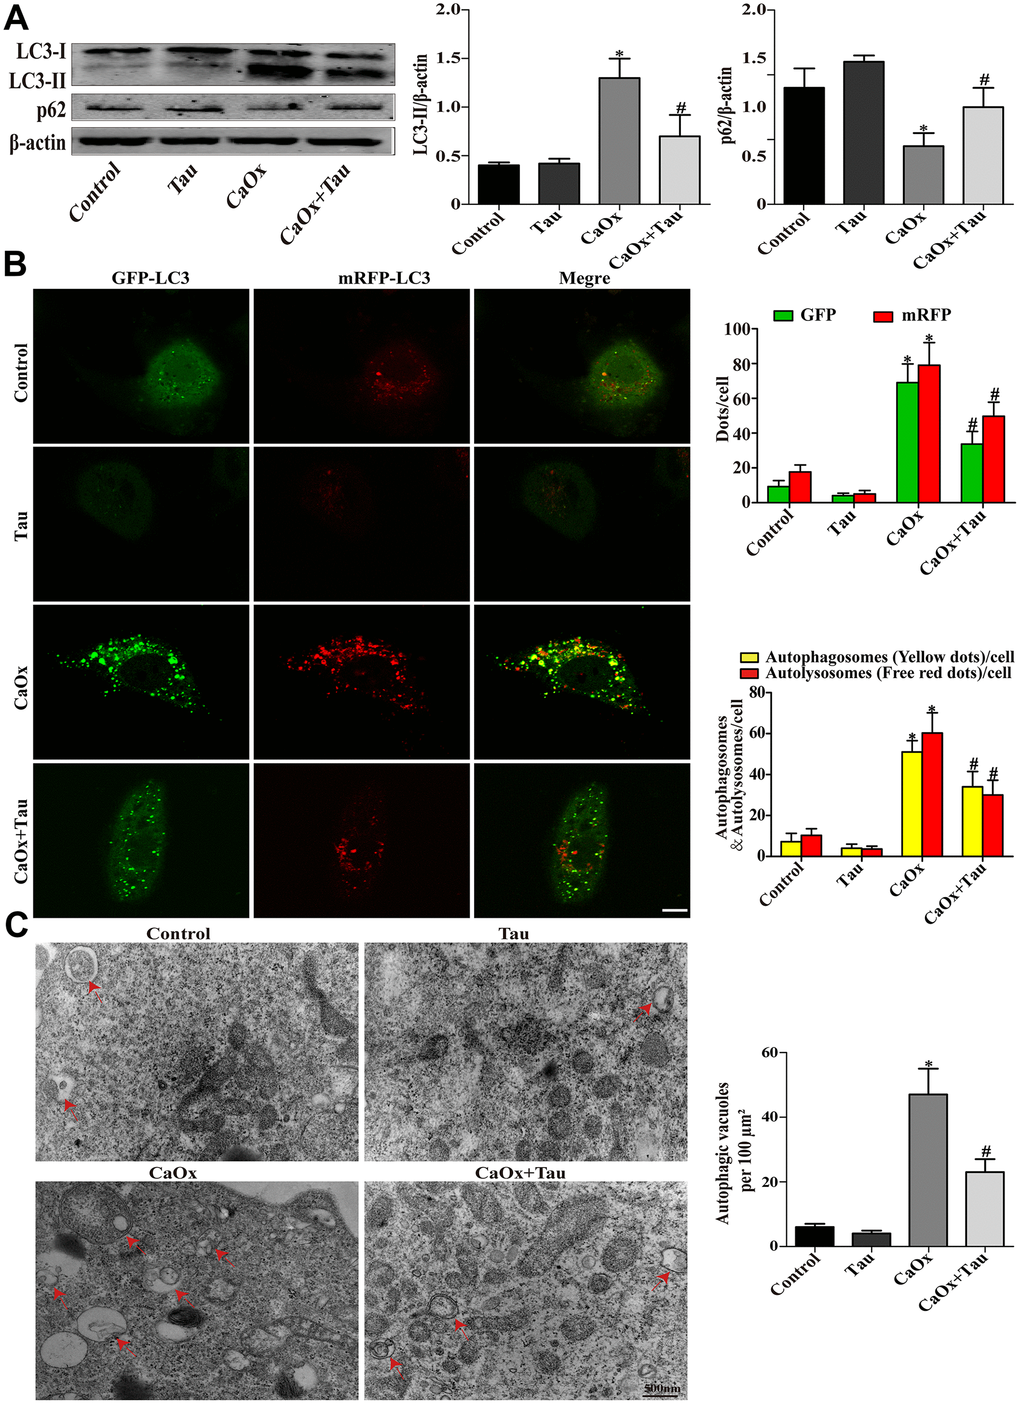 Effects of Tau on CaOx crystals-induced autophagy in cells. (A) The expressions of LC3-II and p62 were assessed by Western blot. (B) Fluorescence microscopy and quantitative analysis of cells transduced with Ad-mRFP-GFP-LC3. The green GFP dots and the red mRFP dots were used to label and track LC3. In the merged image, the yellow dots and the red dots indicate autophagosomes and autolysosomes, respectively; scale bar: 50 μm. (C) Detection of autophagic vacuoles by TEM in HK-2 cells. Red arrows: autophagic vacuoles; scale bar: 500 nm. Data are presented as the mean ± SD (n=3). *P #P 